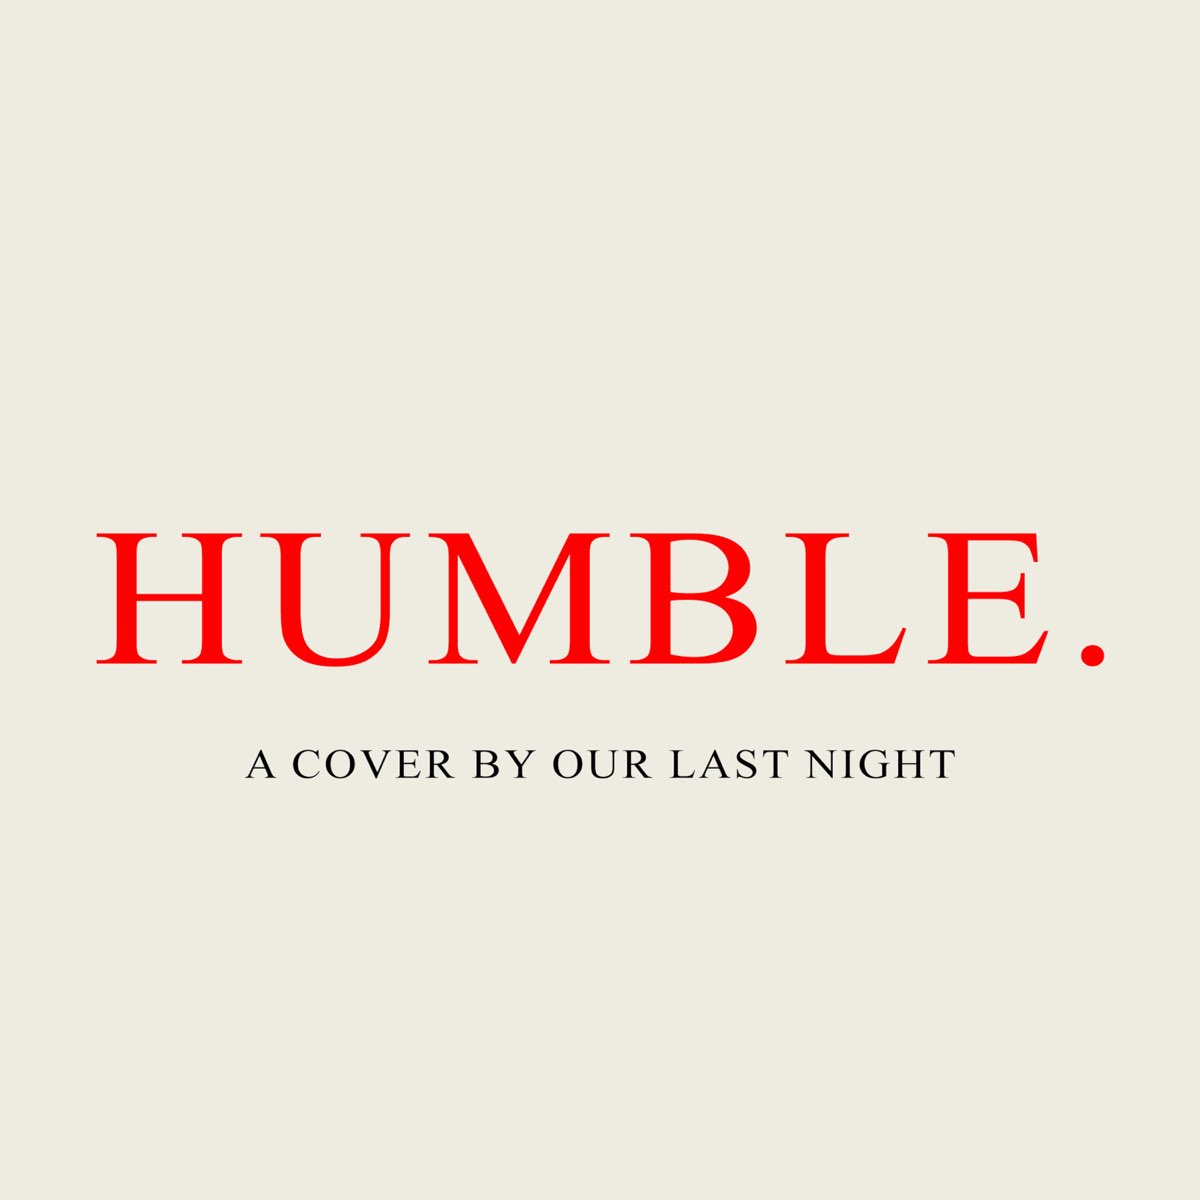 Did you well last night. Our last Night обложка. Humble обложка. Обложка песни Humble. Kendrick Lamar Humble Cover.